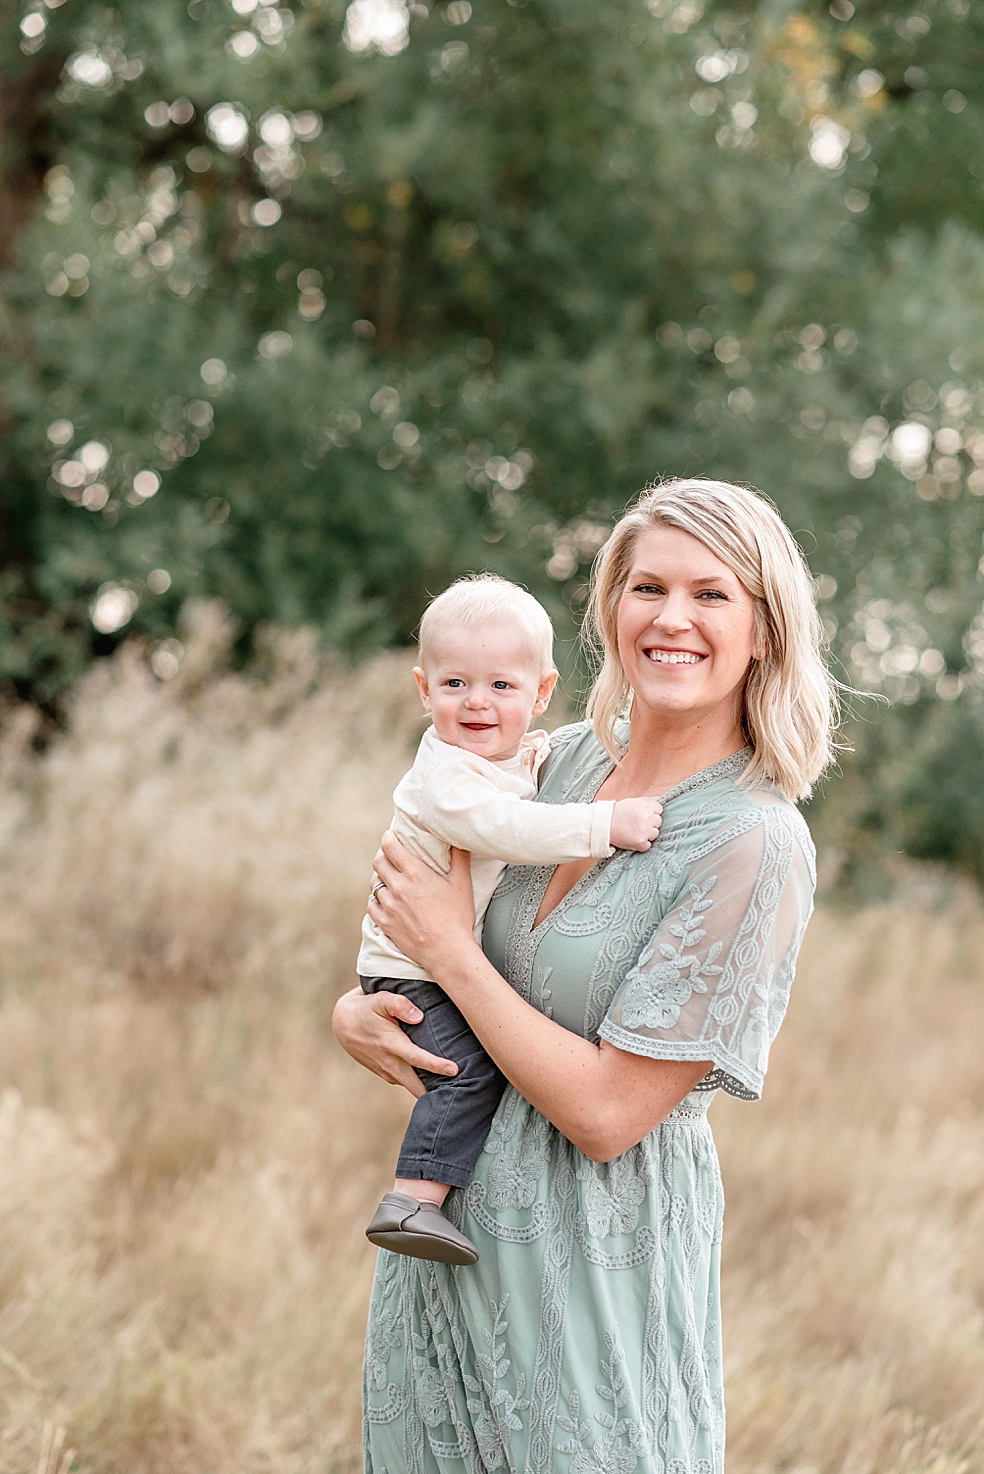 Mom in a sea foam green dress holding her little boy | Photo by Jessica Lee Photography